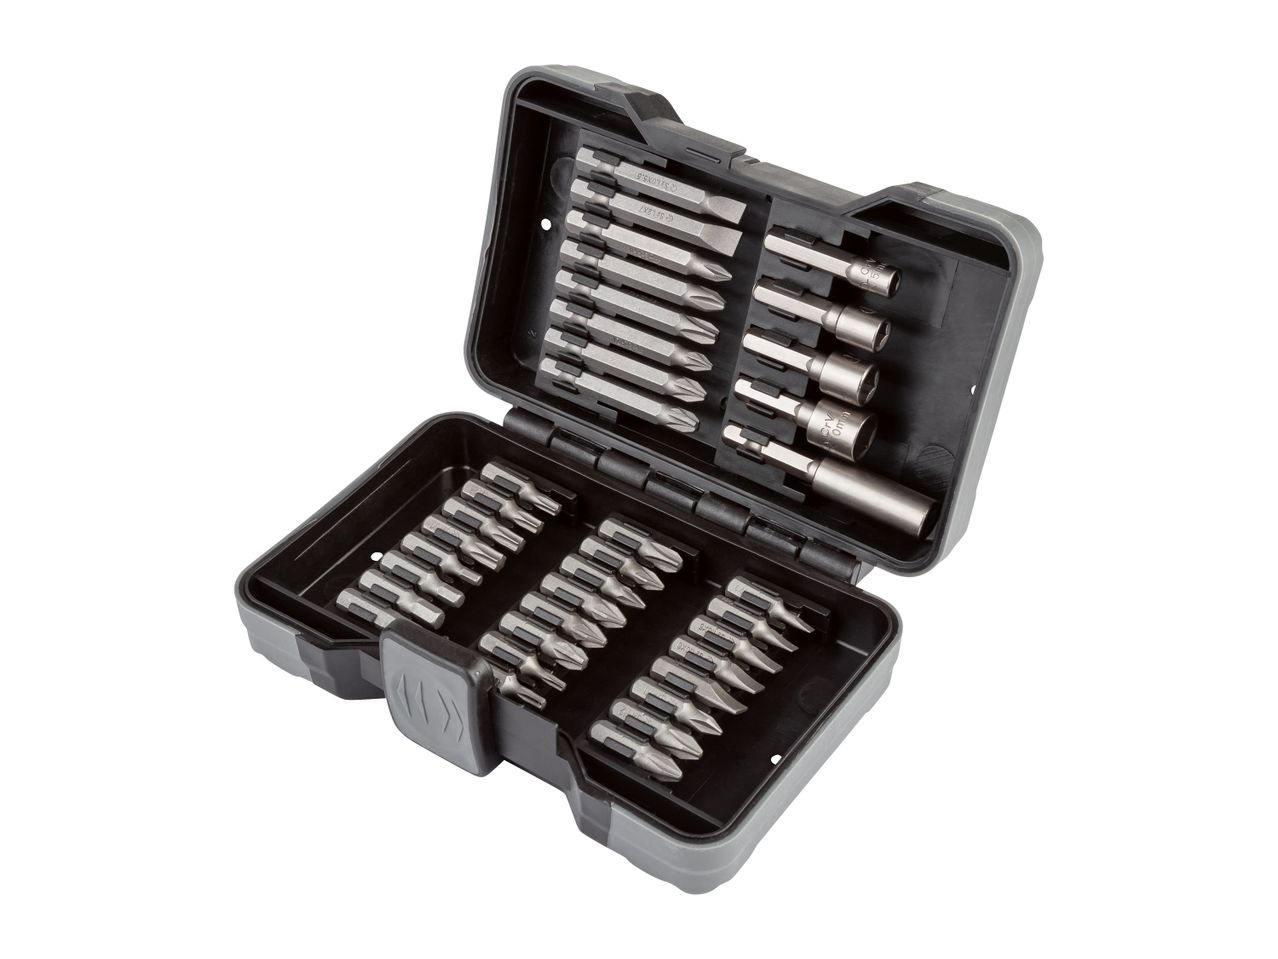 Go to full screen view: PARKSIDE Bit / Drill Bit Set - Image 6